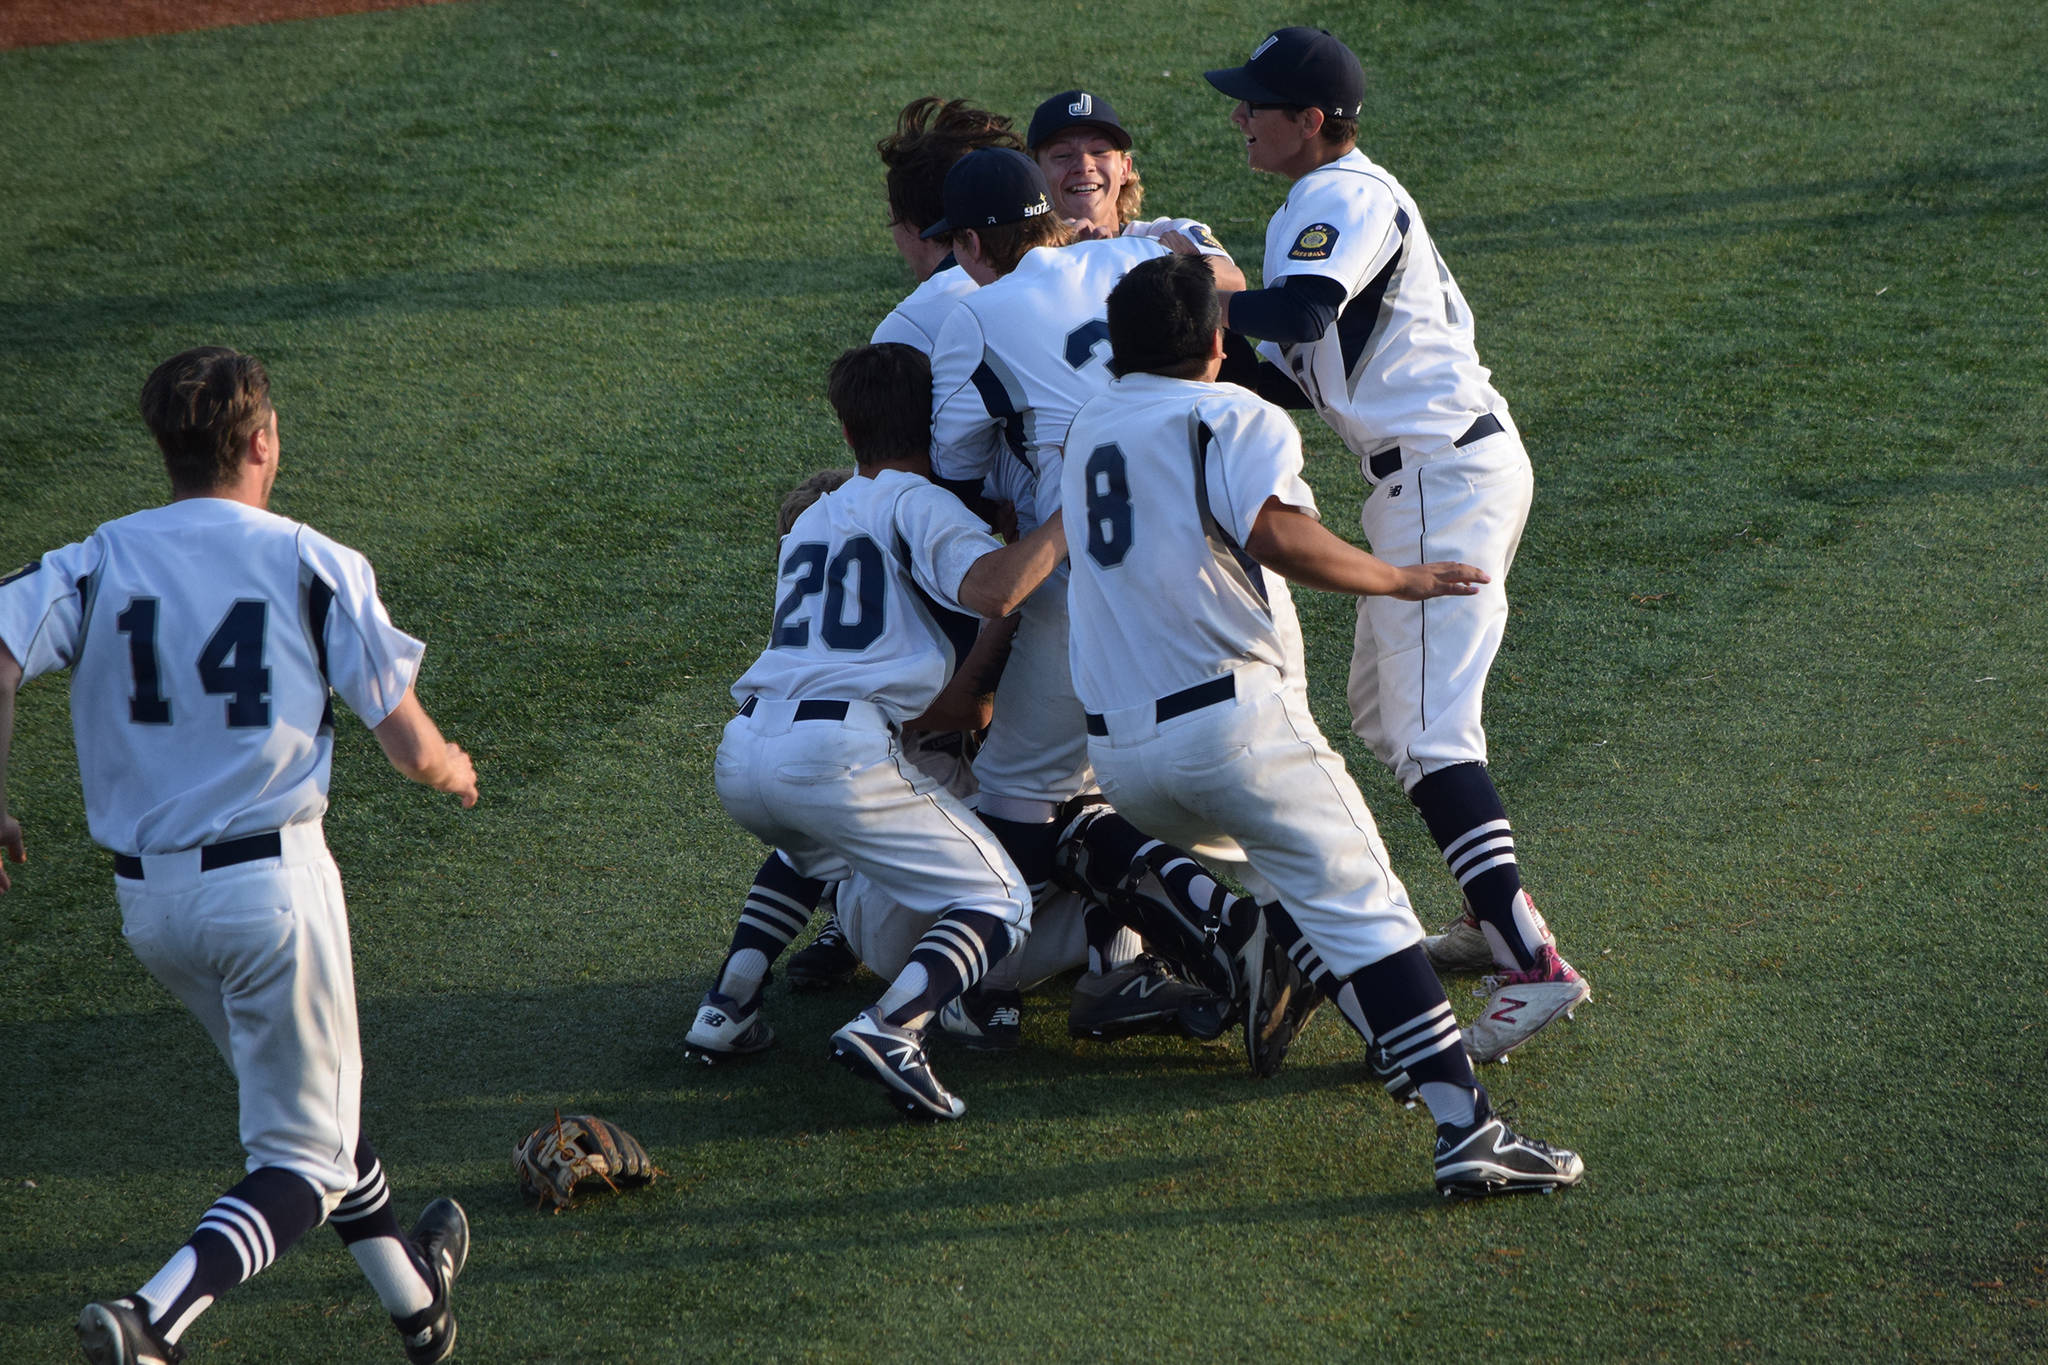 The Juneau Post 25 baseball team celebrates winning its third consecutive American Legion state championship at Mulcahy Stadium in Anchorage on Tuesday, July 30, 2019. Juneau defeated Wasilla Post 35, 13-8, in an eight-inning thriller. (Nolin Ainsworth | Juneau Empire)